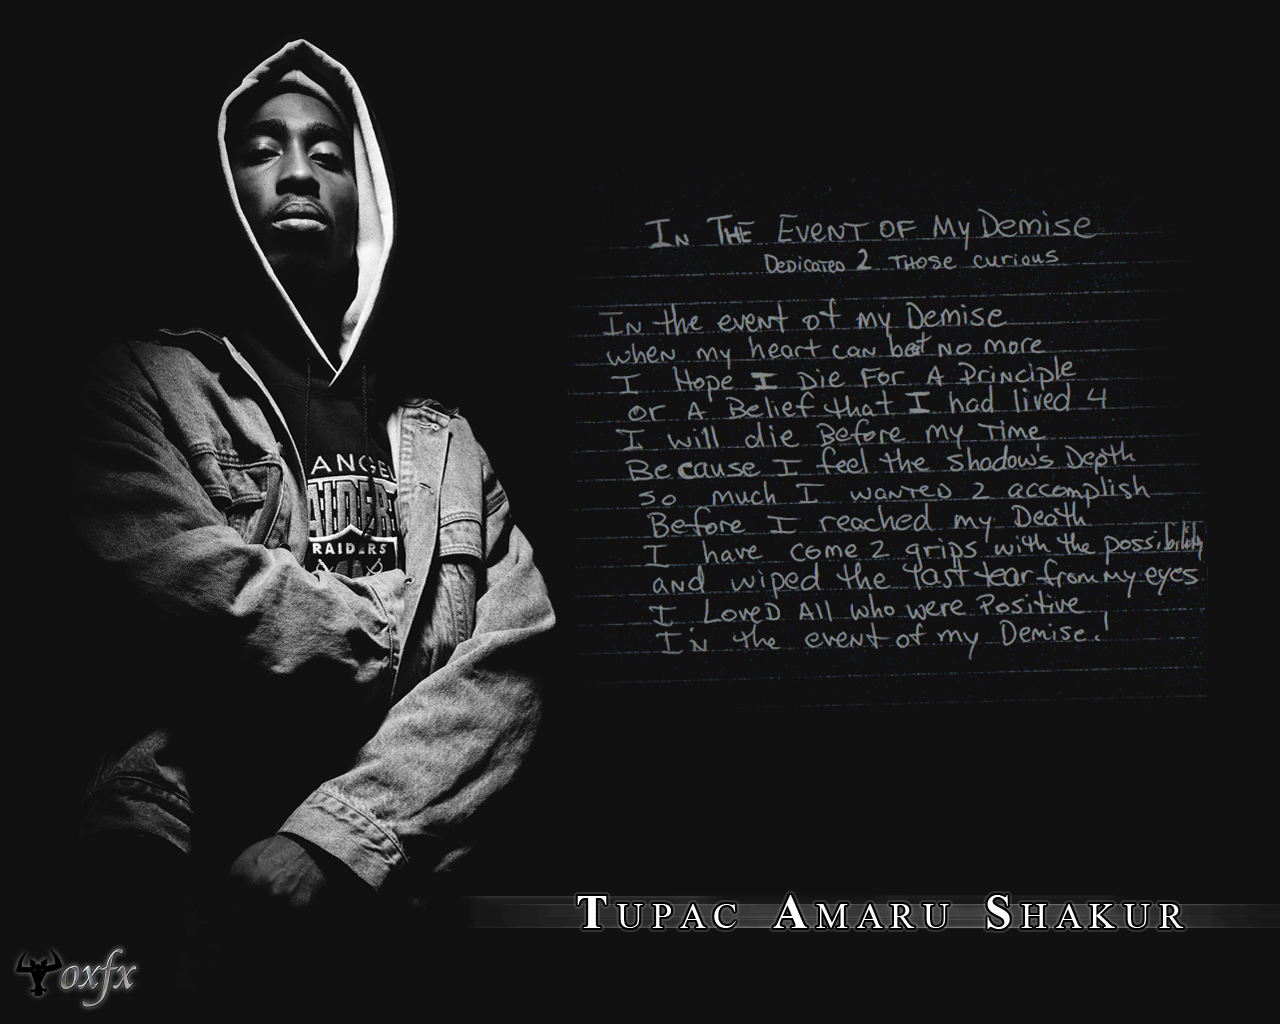 Tupac Shakur Quotes 2pac Quote Wallpaper